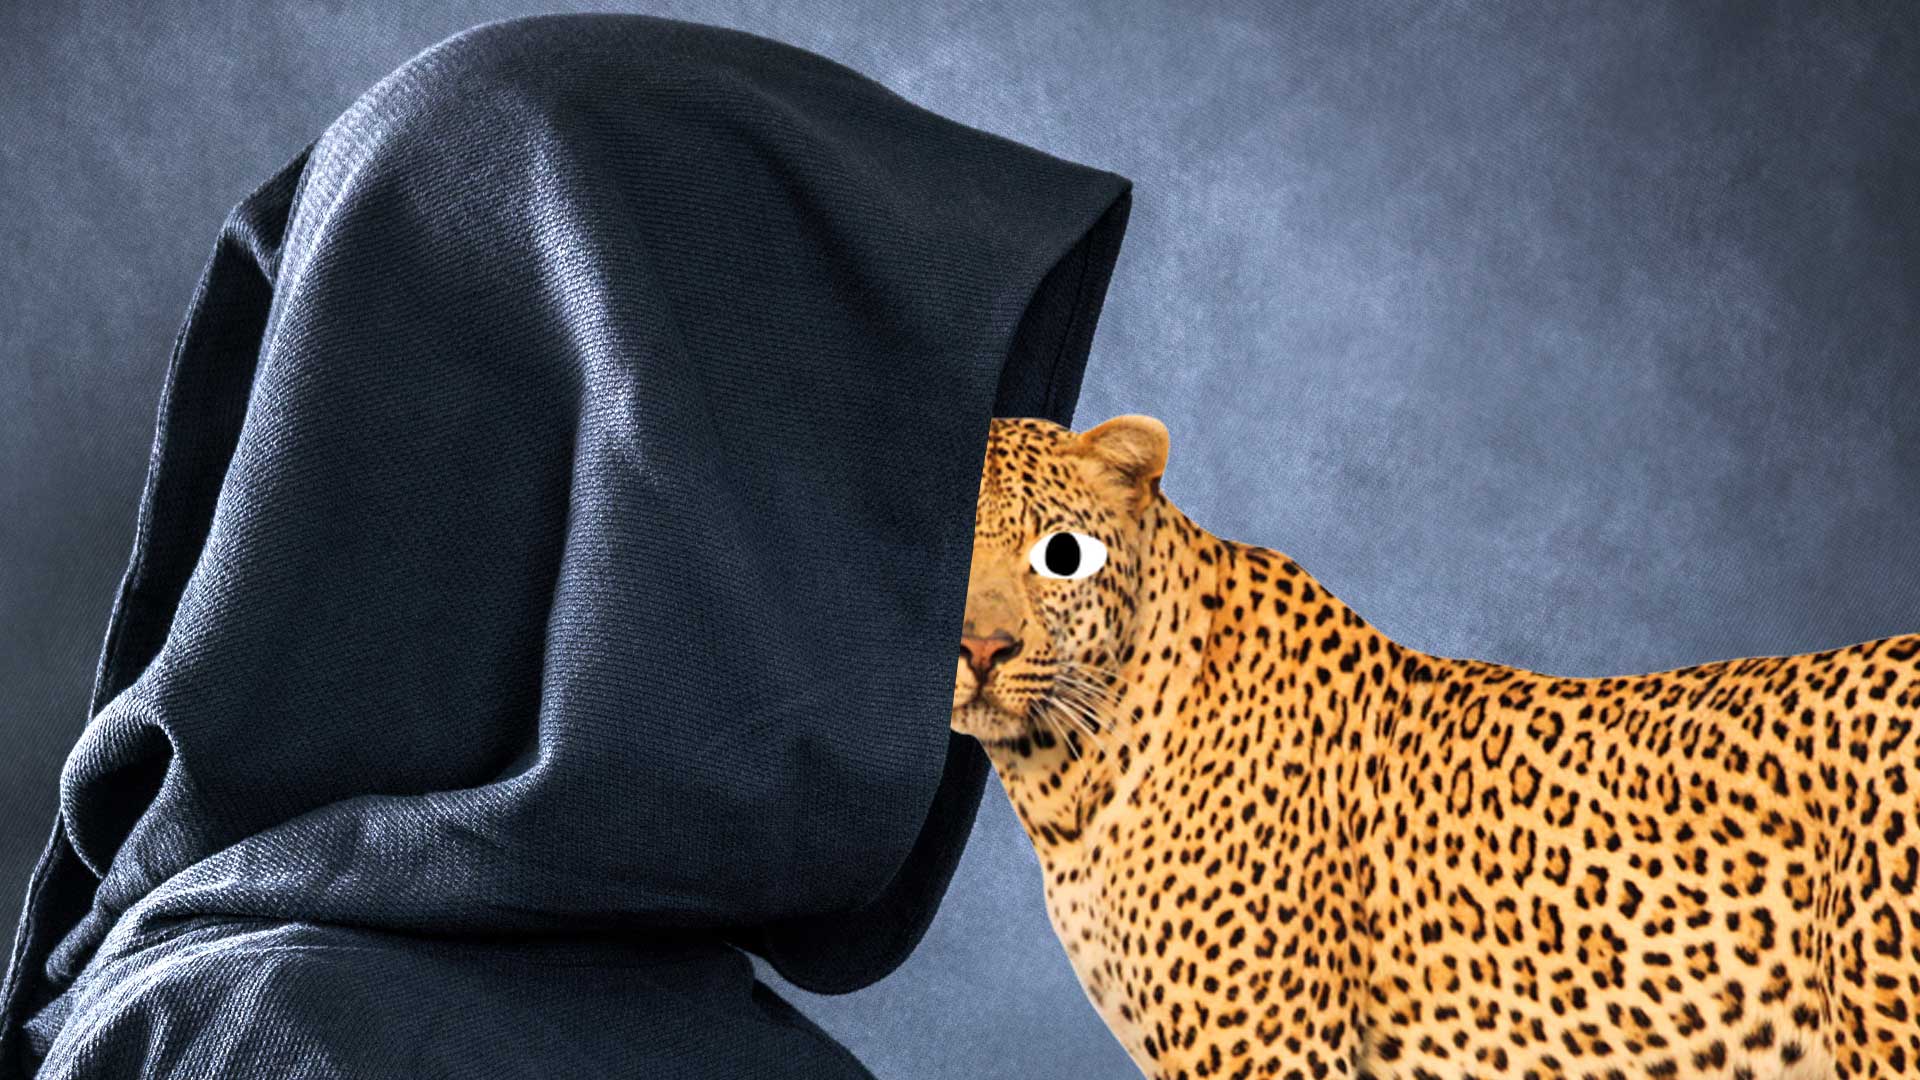 A hooded monk and a curious leopard